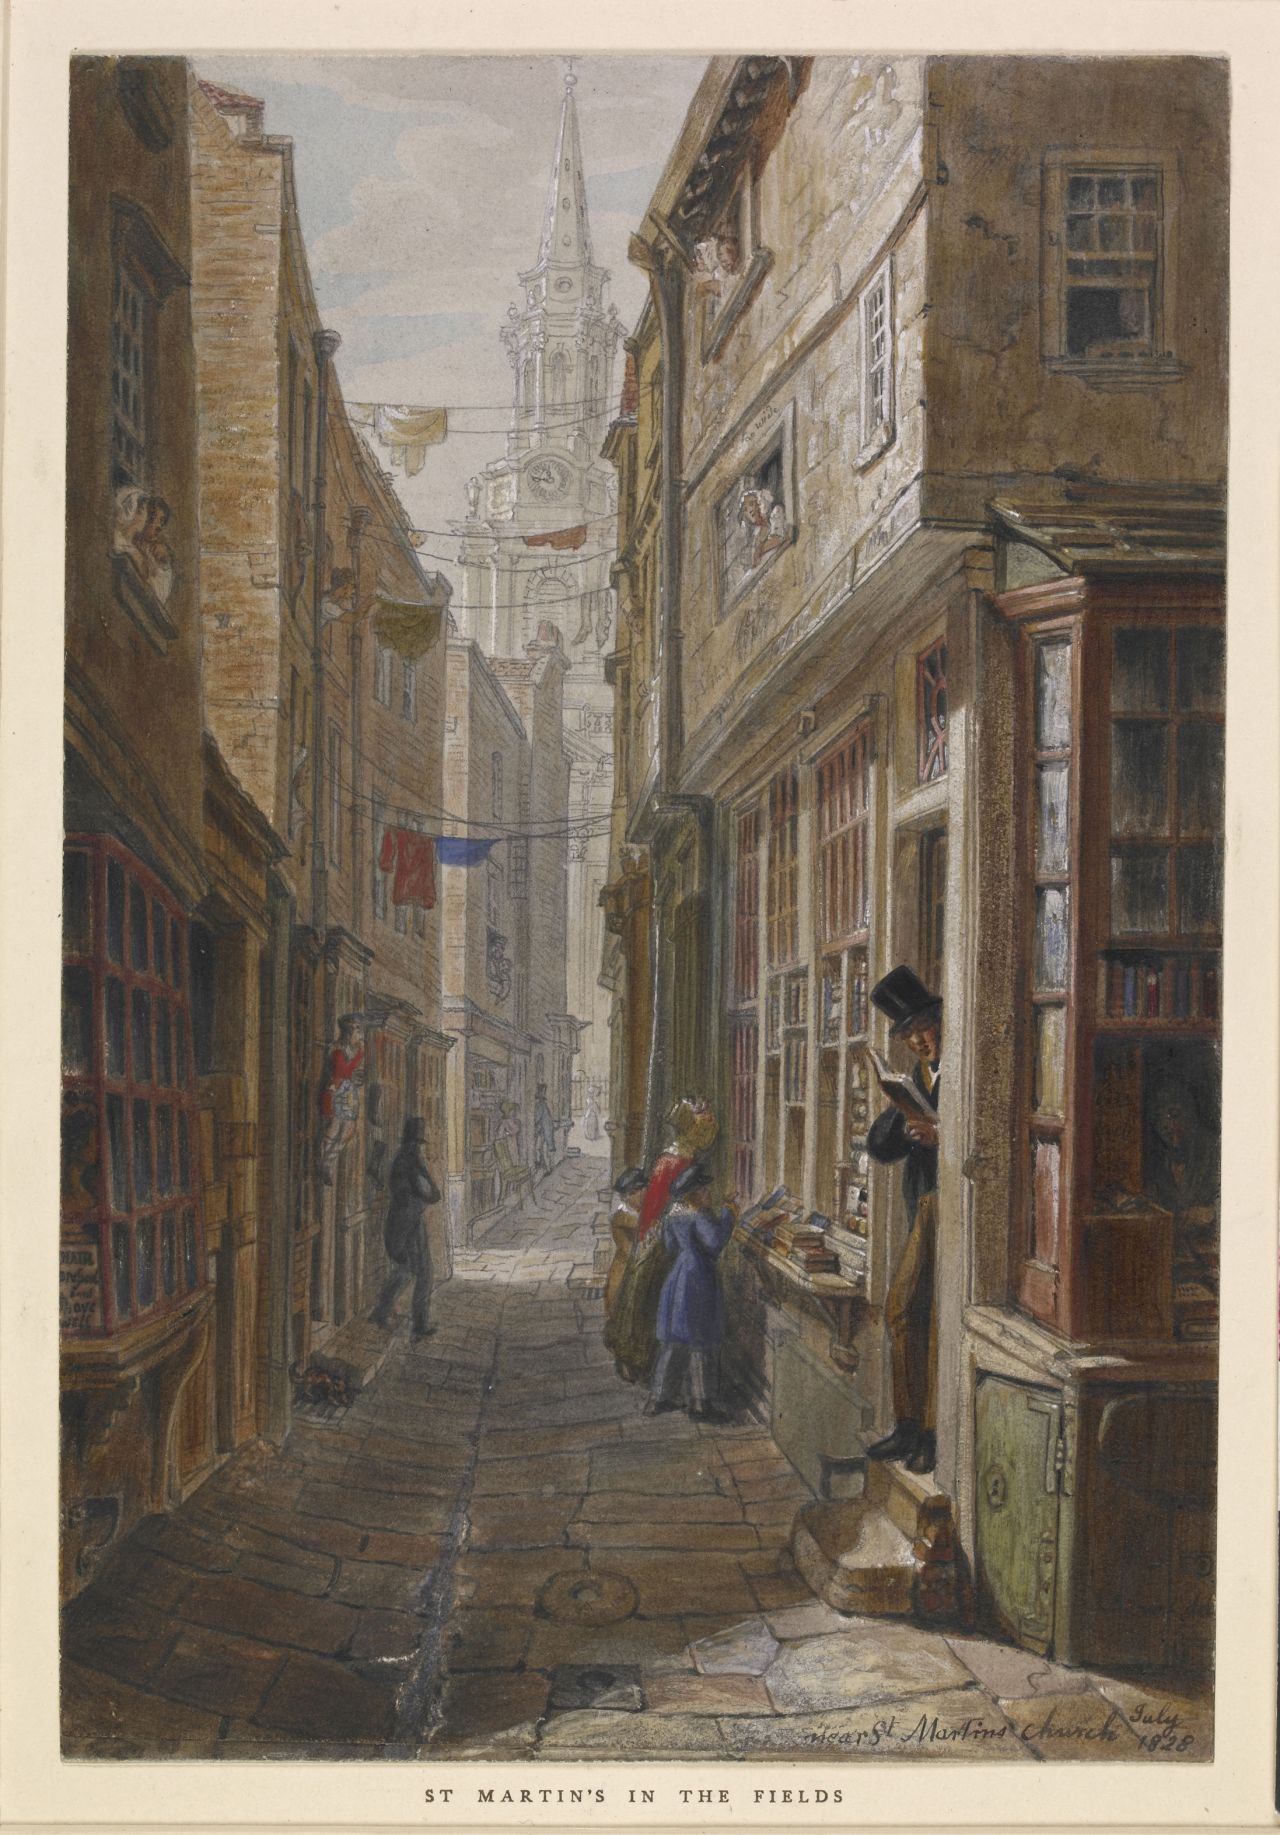 As a boy, Dickens frequented "pudding shops" near the warren of small alleys and lanes south of St Martin's-in-the-Fields in central London. 